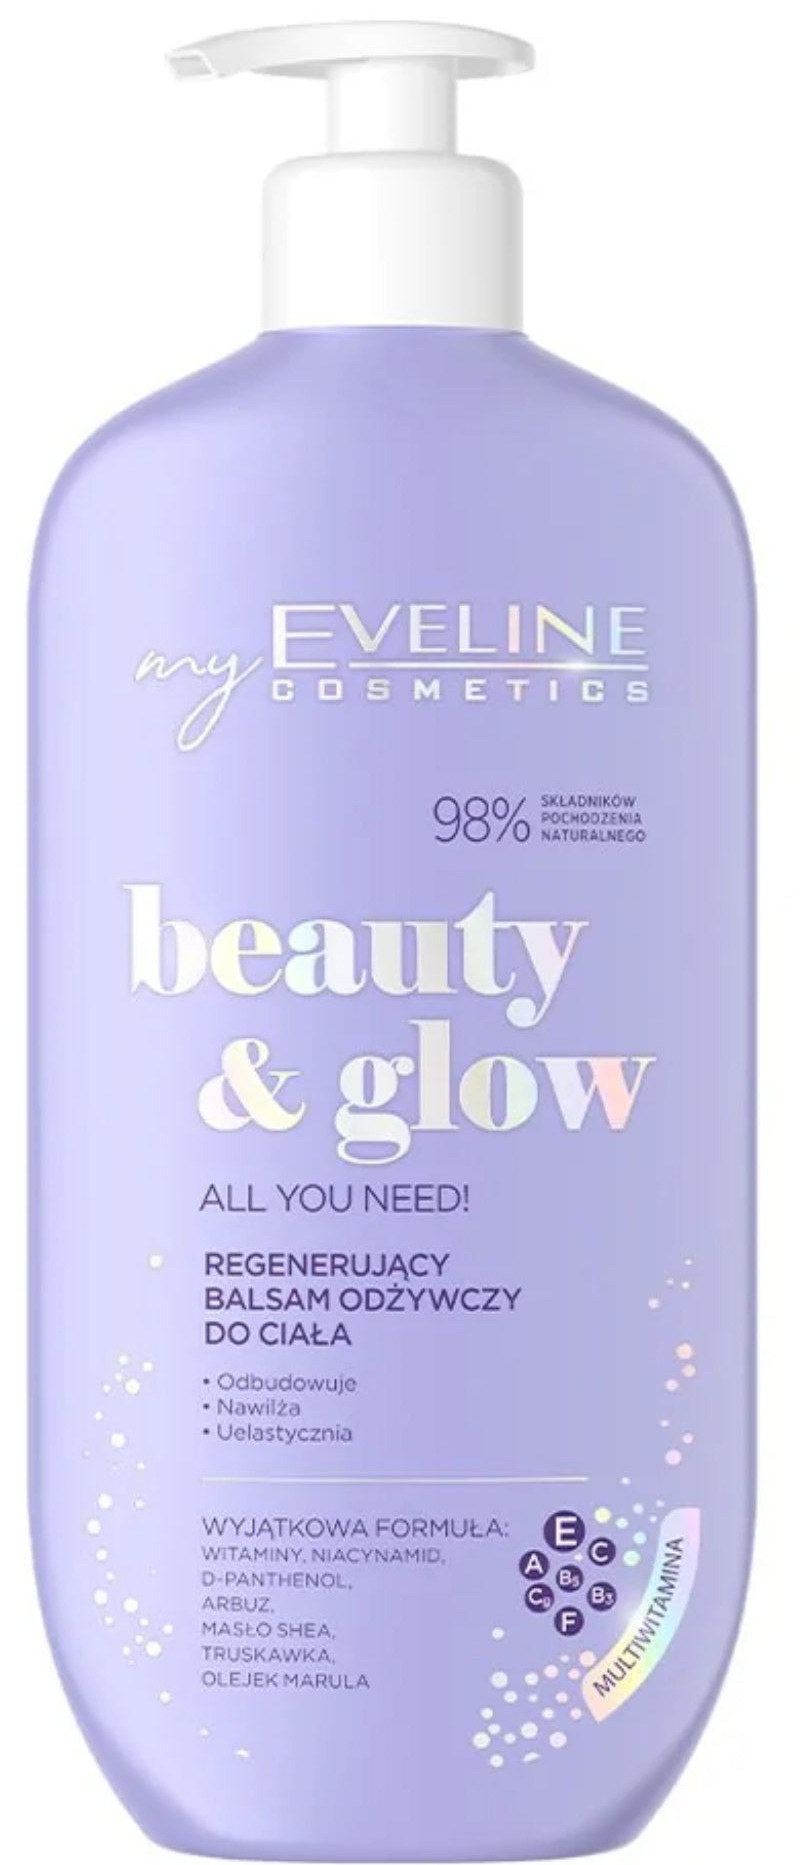 Eveline Beauty & Glow All You Need! Regenerating And Nourishing Body Lotion